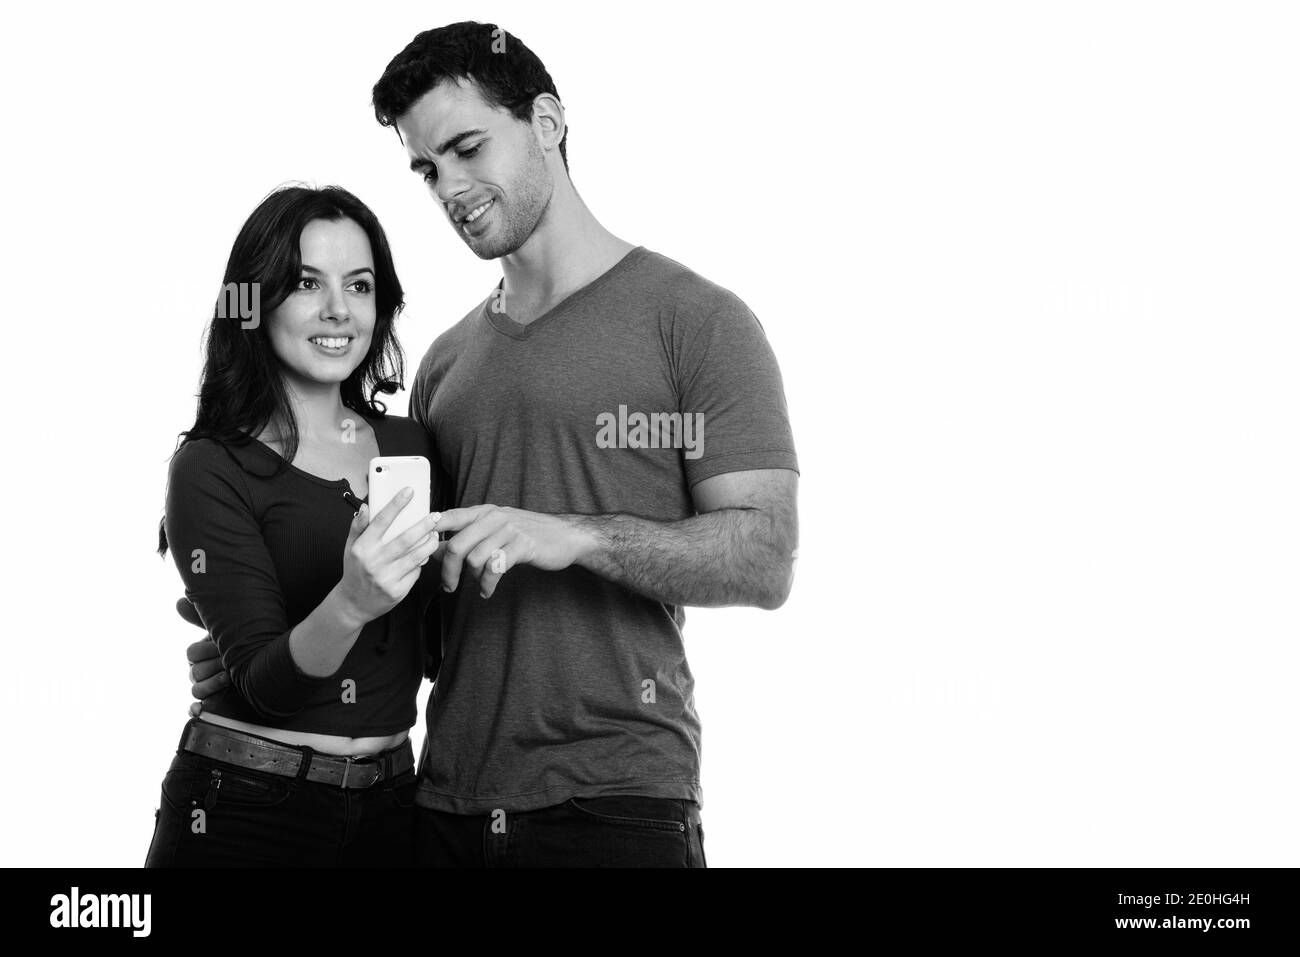 Studio shot of young happy couple smiling with man using mobile phone and woman thinking Stock Photo